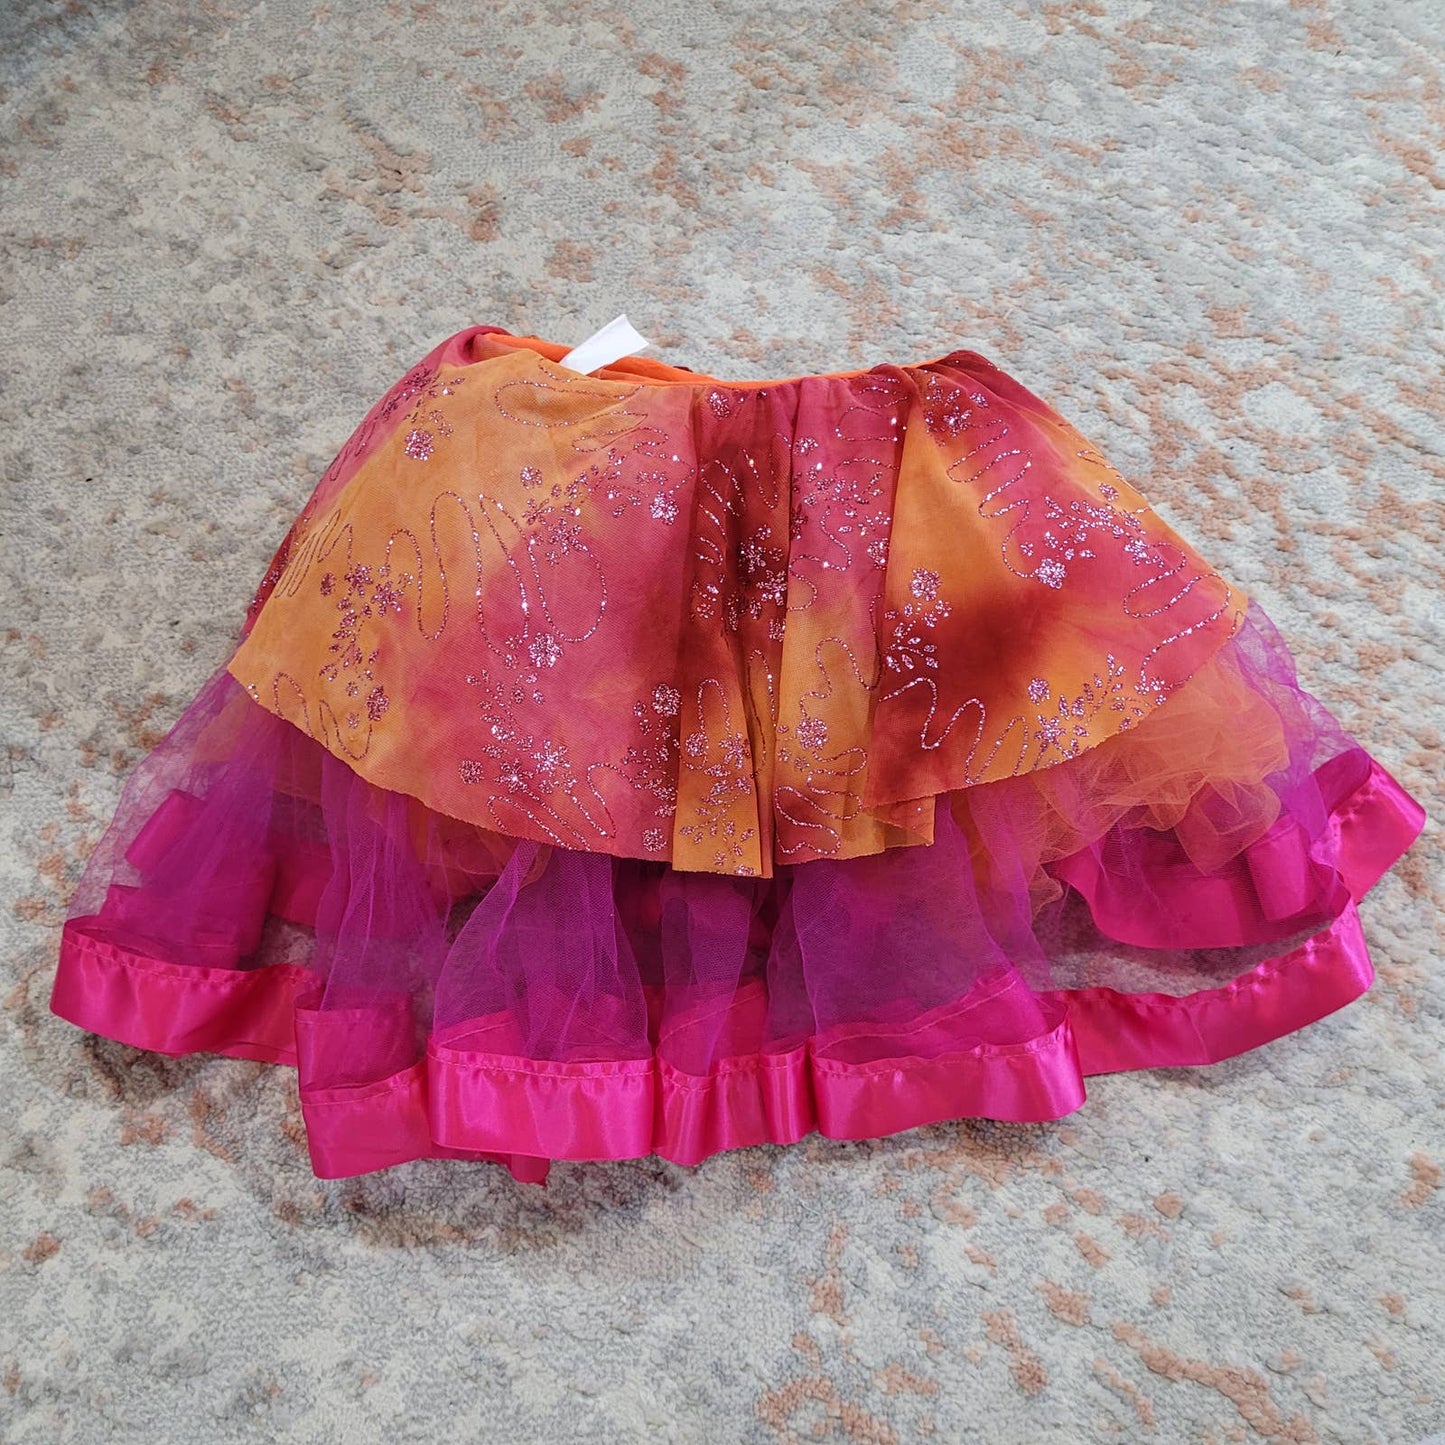 Art Stone Girls Tulle Skirt with Glitterly Overlay in Sunset Colors - Size Small